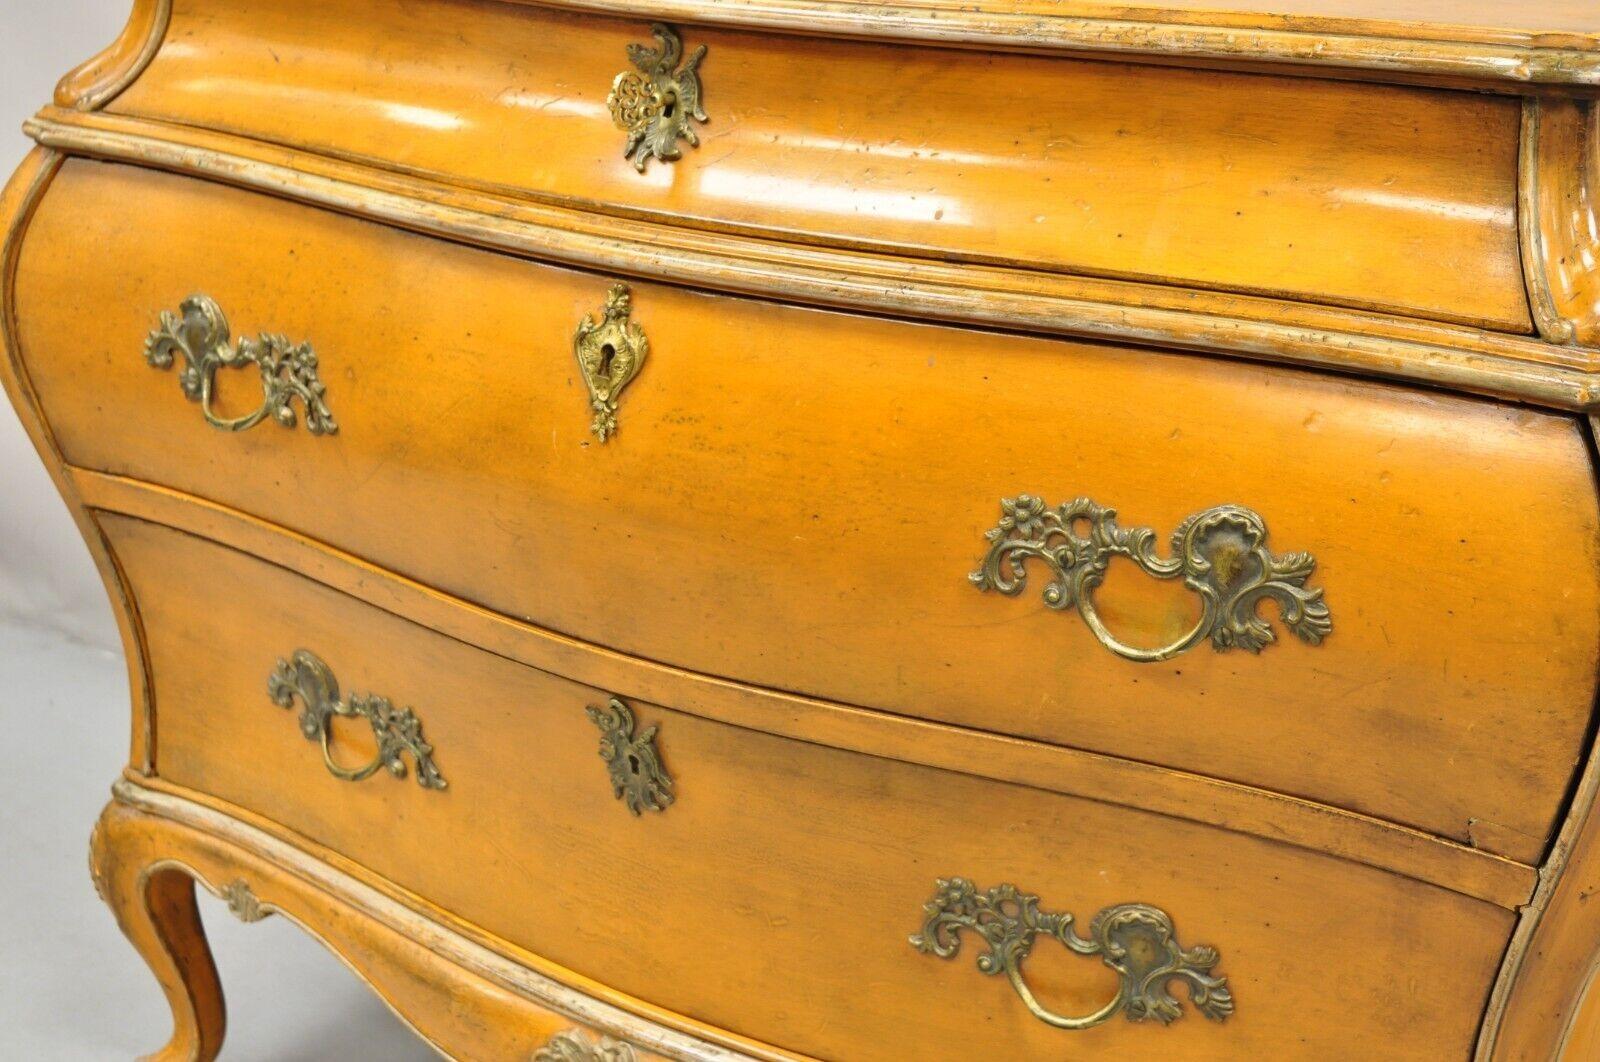 Antique Italian Rococo Orange Painted Bombe Commode, Chest of Drawers. Item features Original orange distress painted finish, shapely bombe form, quality dovetailed construction to rear, ornate brass hardware, very unique chest of drawers Circa